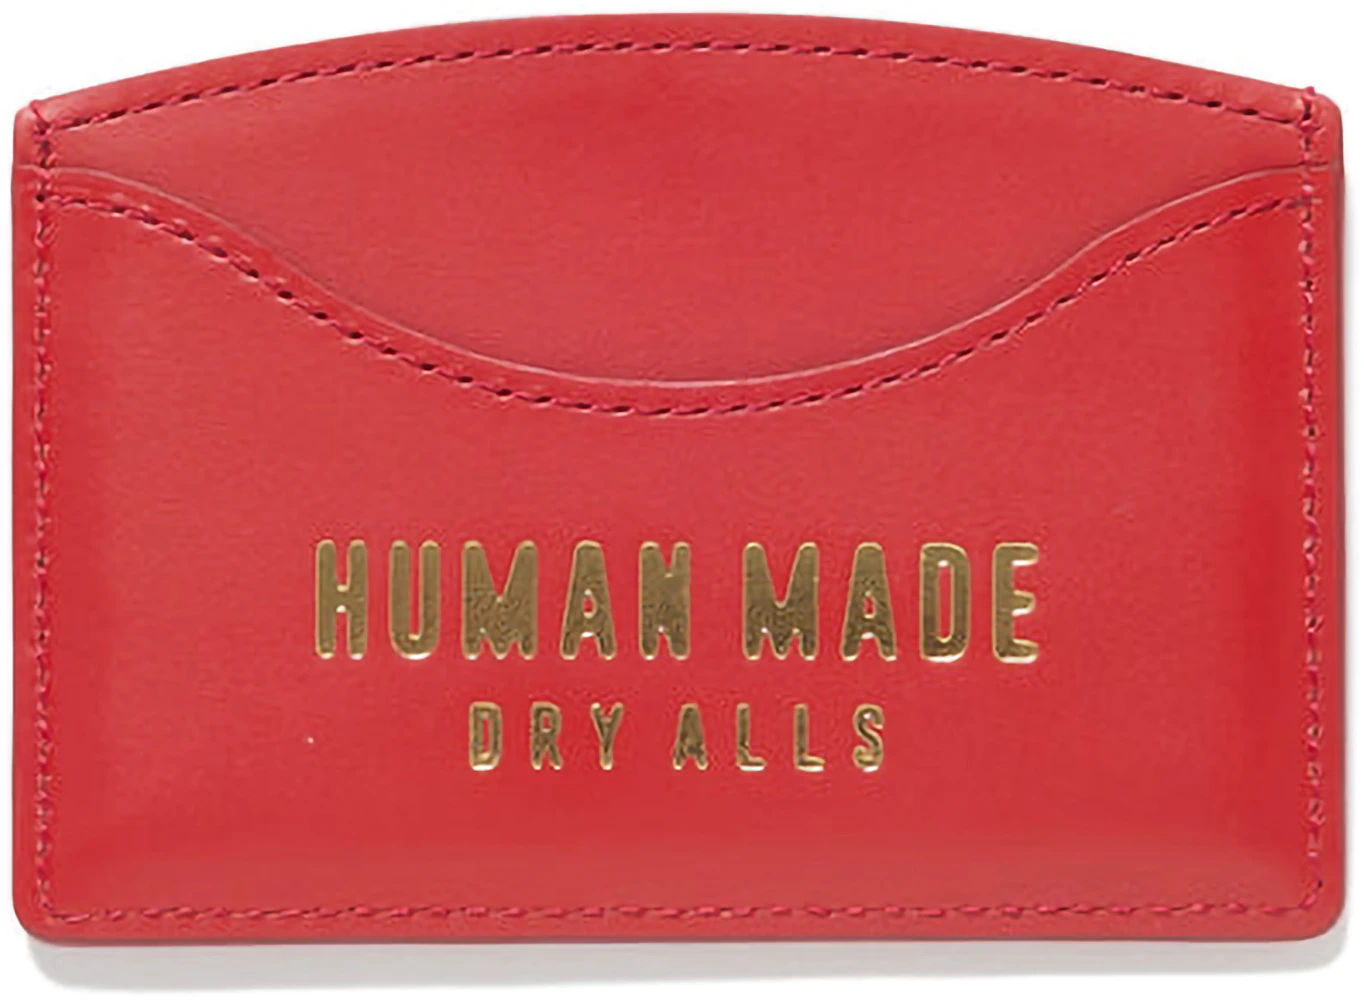 LEATHER CARD CASE  is available at 26th August 11:00am (JST) at Human Made  stores mentioned below. 8月26日AM11時より、LEATHER CARD CASE ” が…